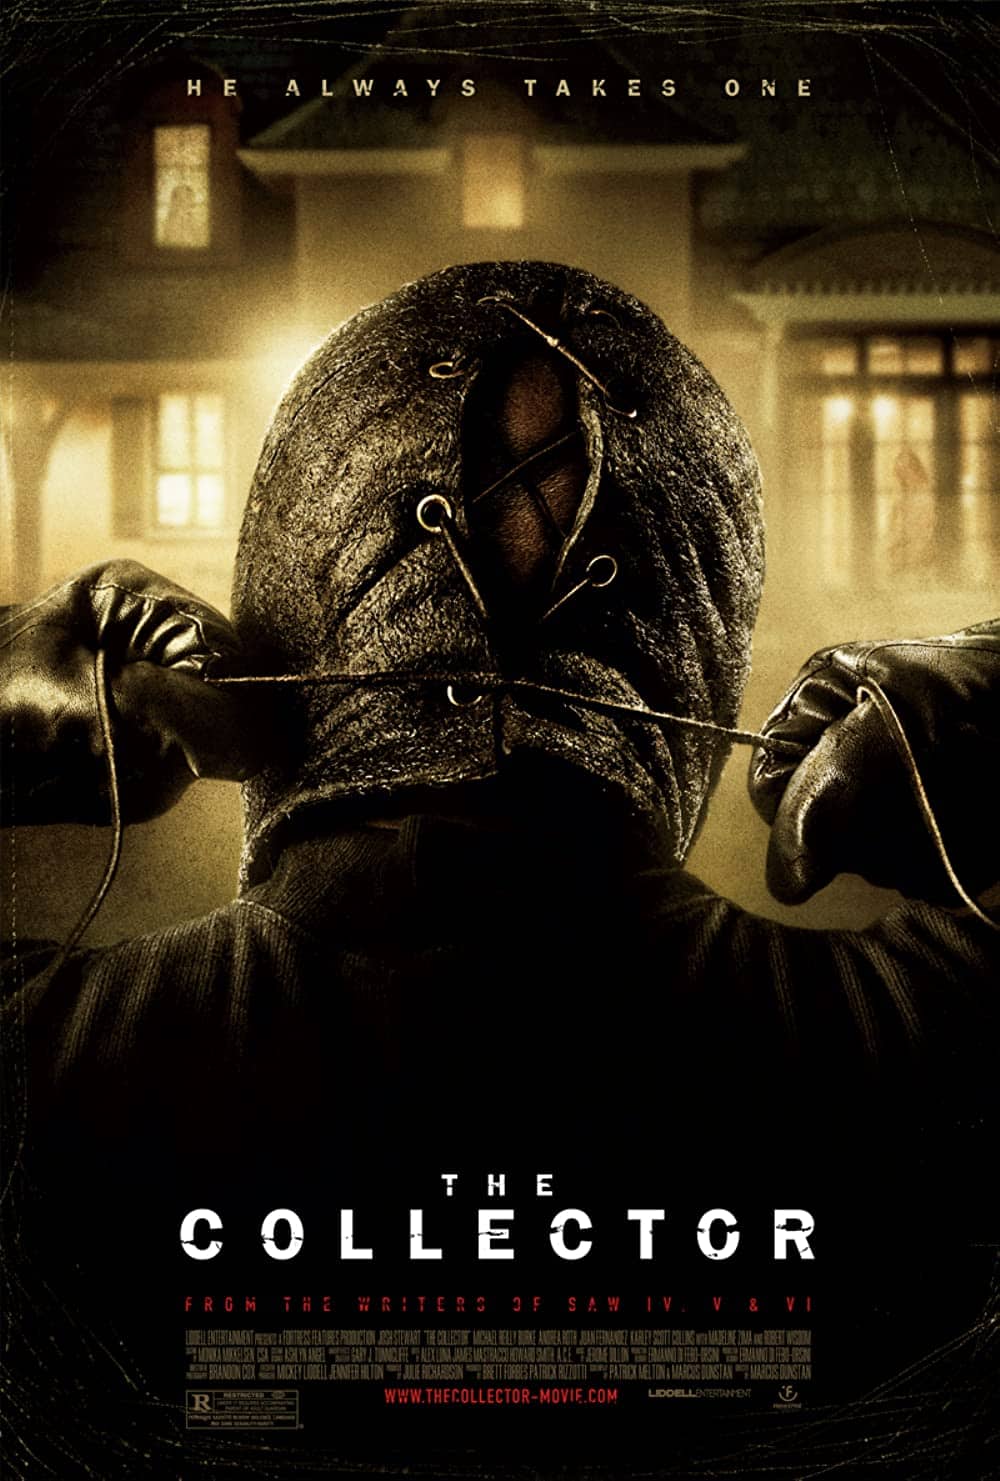 The Collector (2009) Best Home Invasion Movies For Chilly Nights